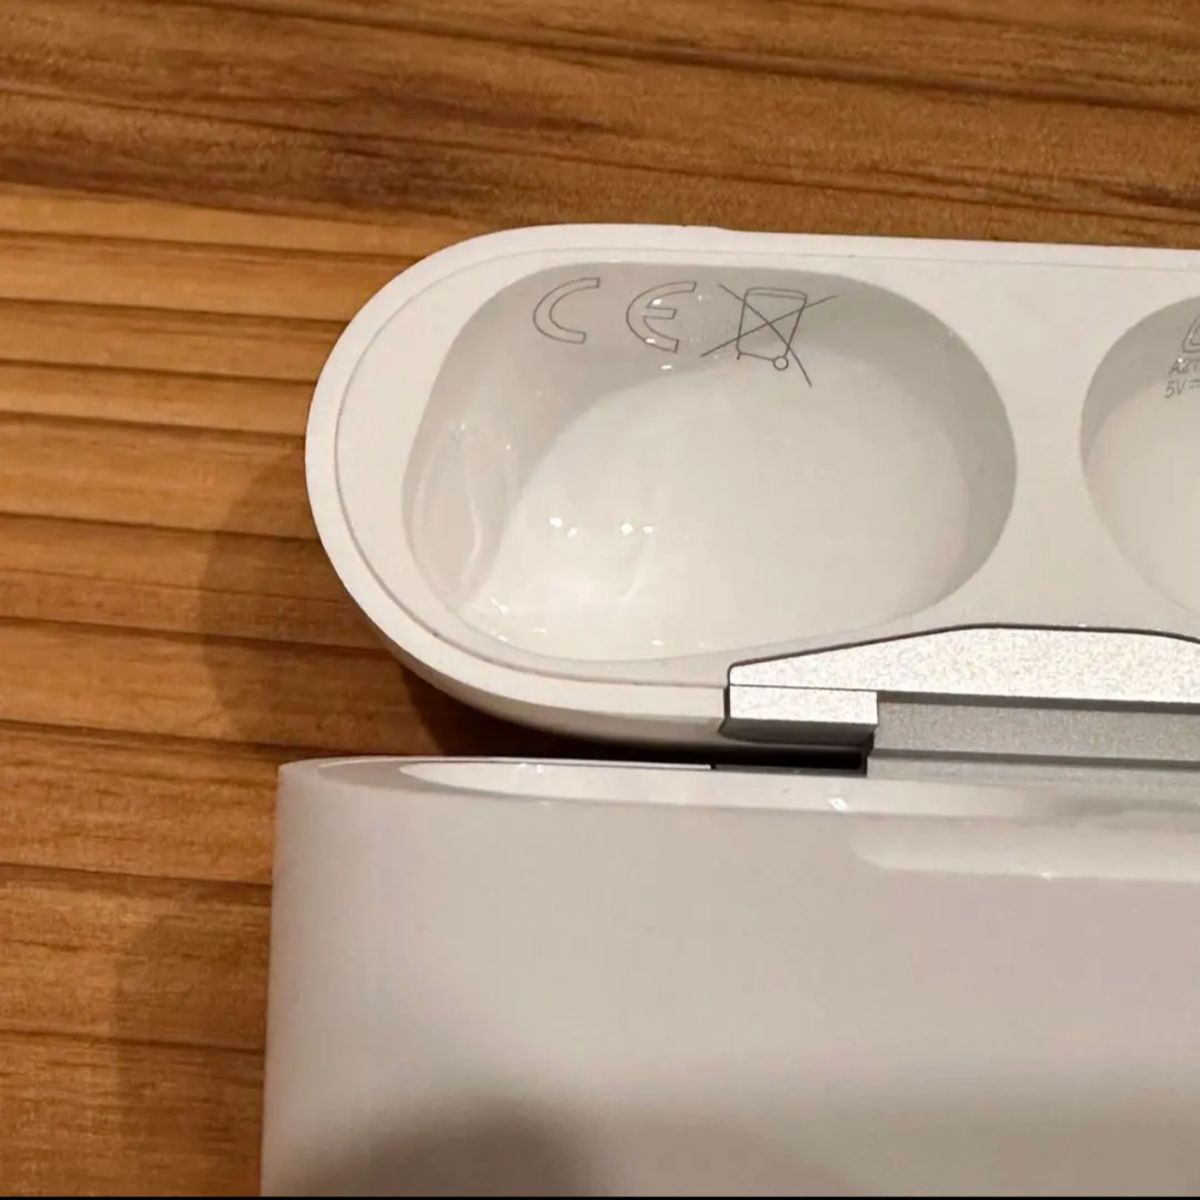 Apple AirPods Pro A2190 ケースのみ 正規品